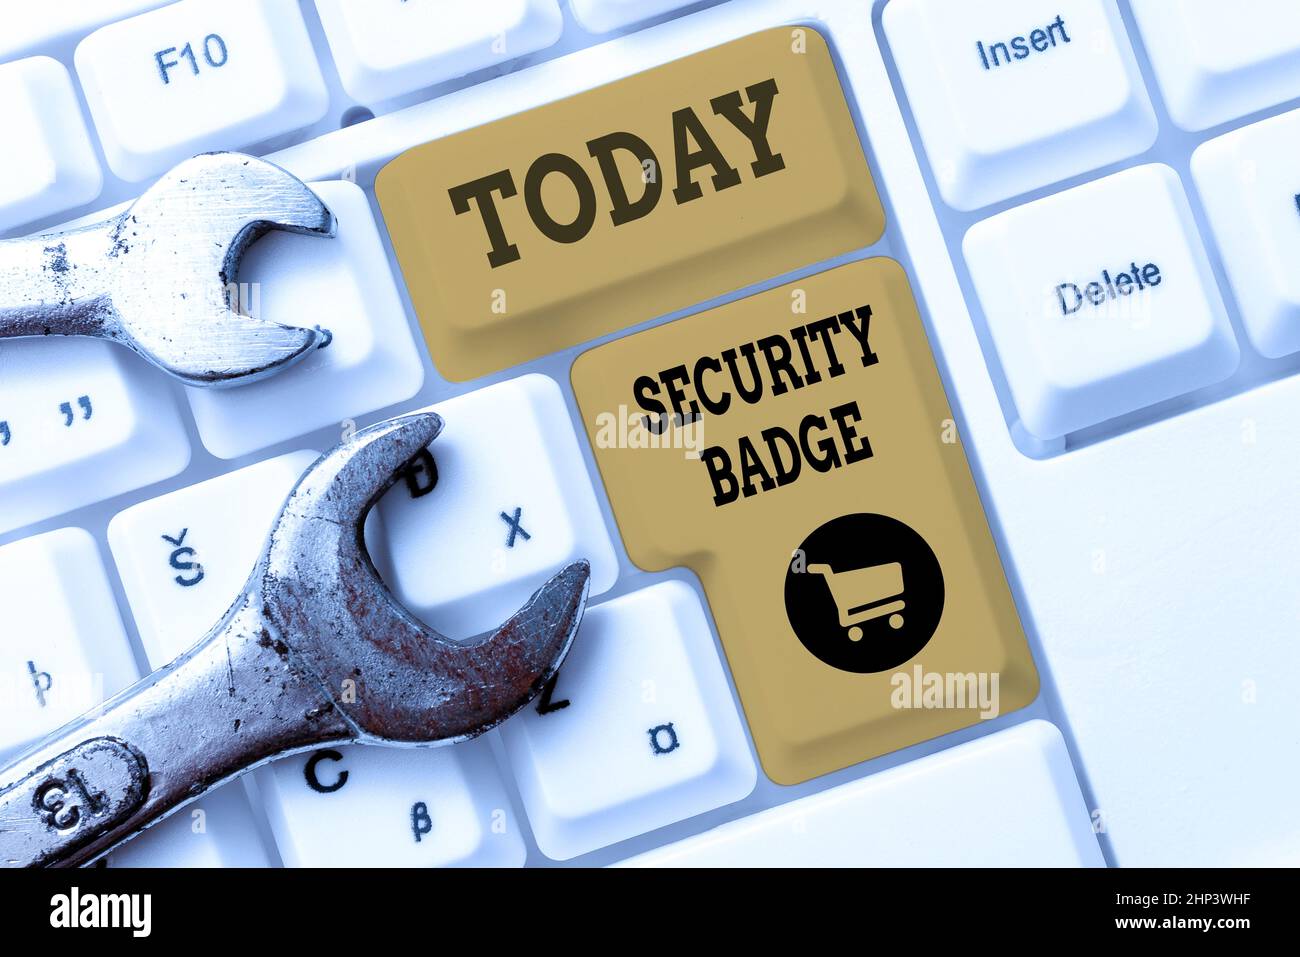 Conceptual display Security Badge, Word for Credential used to gain accessed on the controlled area Abstract Fixing Internet Problem, Maintaining Onli Stock Photo